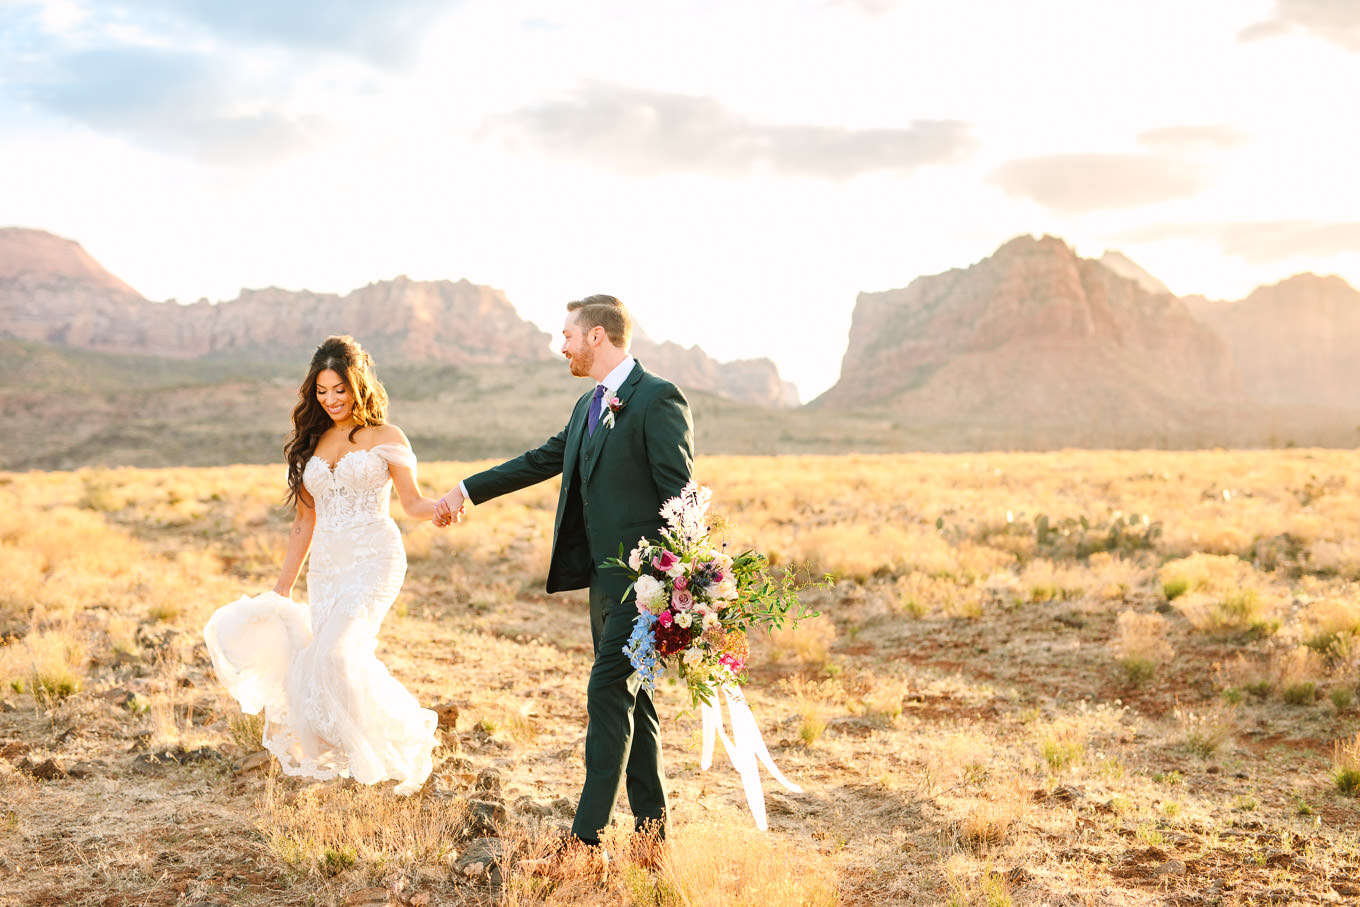 Bride and groom walking | Zion Under Canvas camping elopement at sunrise | Colorful elopement photography | #utahelopement #zionelopement #zionwedding #undercanvaszion #sunriseelopement #adventureelopement  Source: Mary Costa Photography | Los Angeles